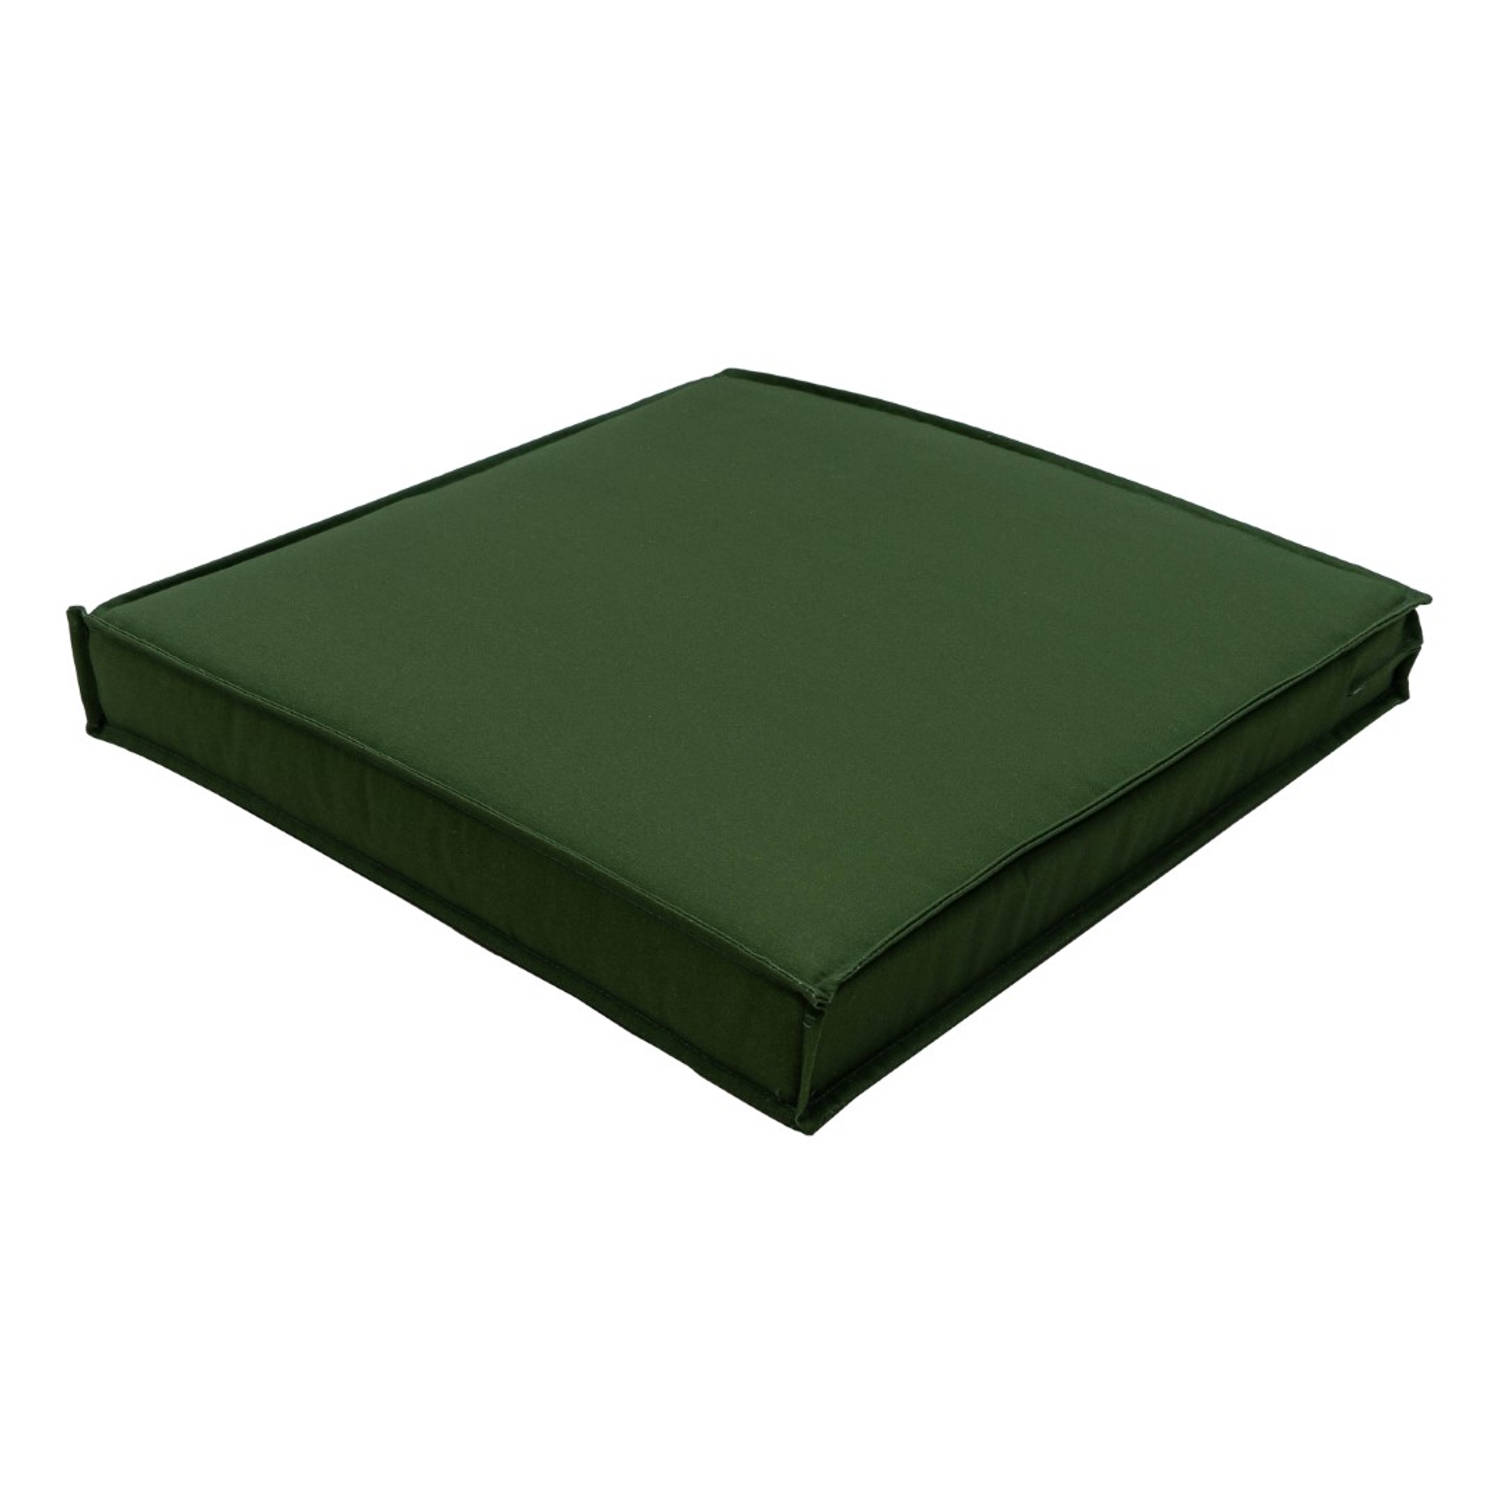 Lounge Luxe 60x60 Eco Olivine Green Nature Outdoor Finishing